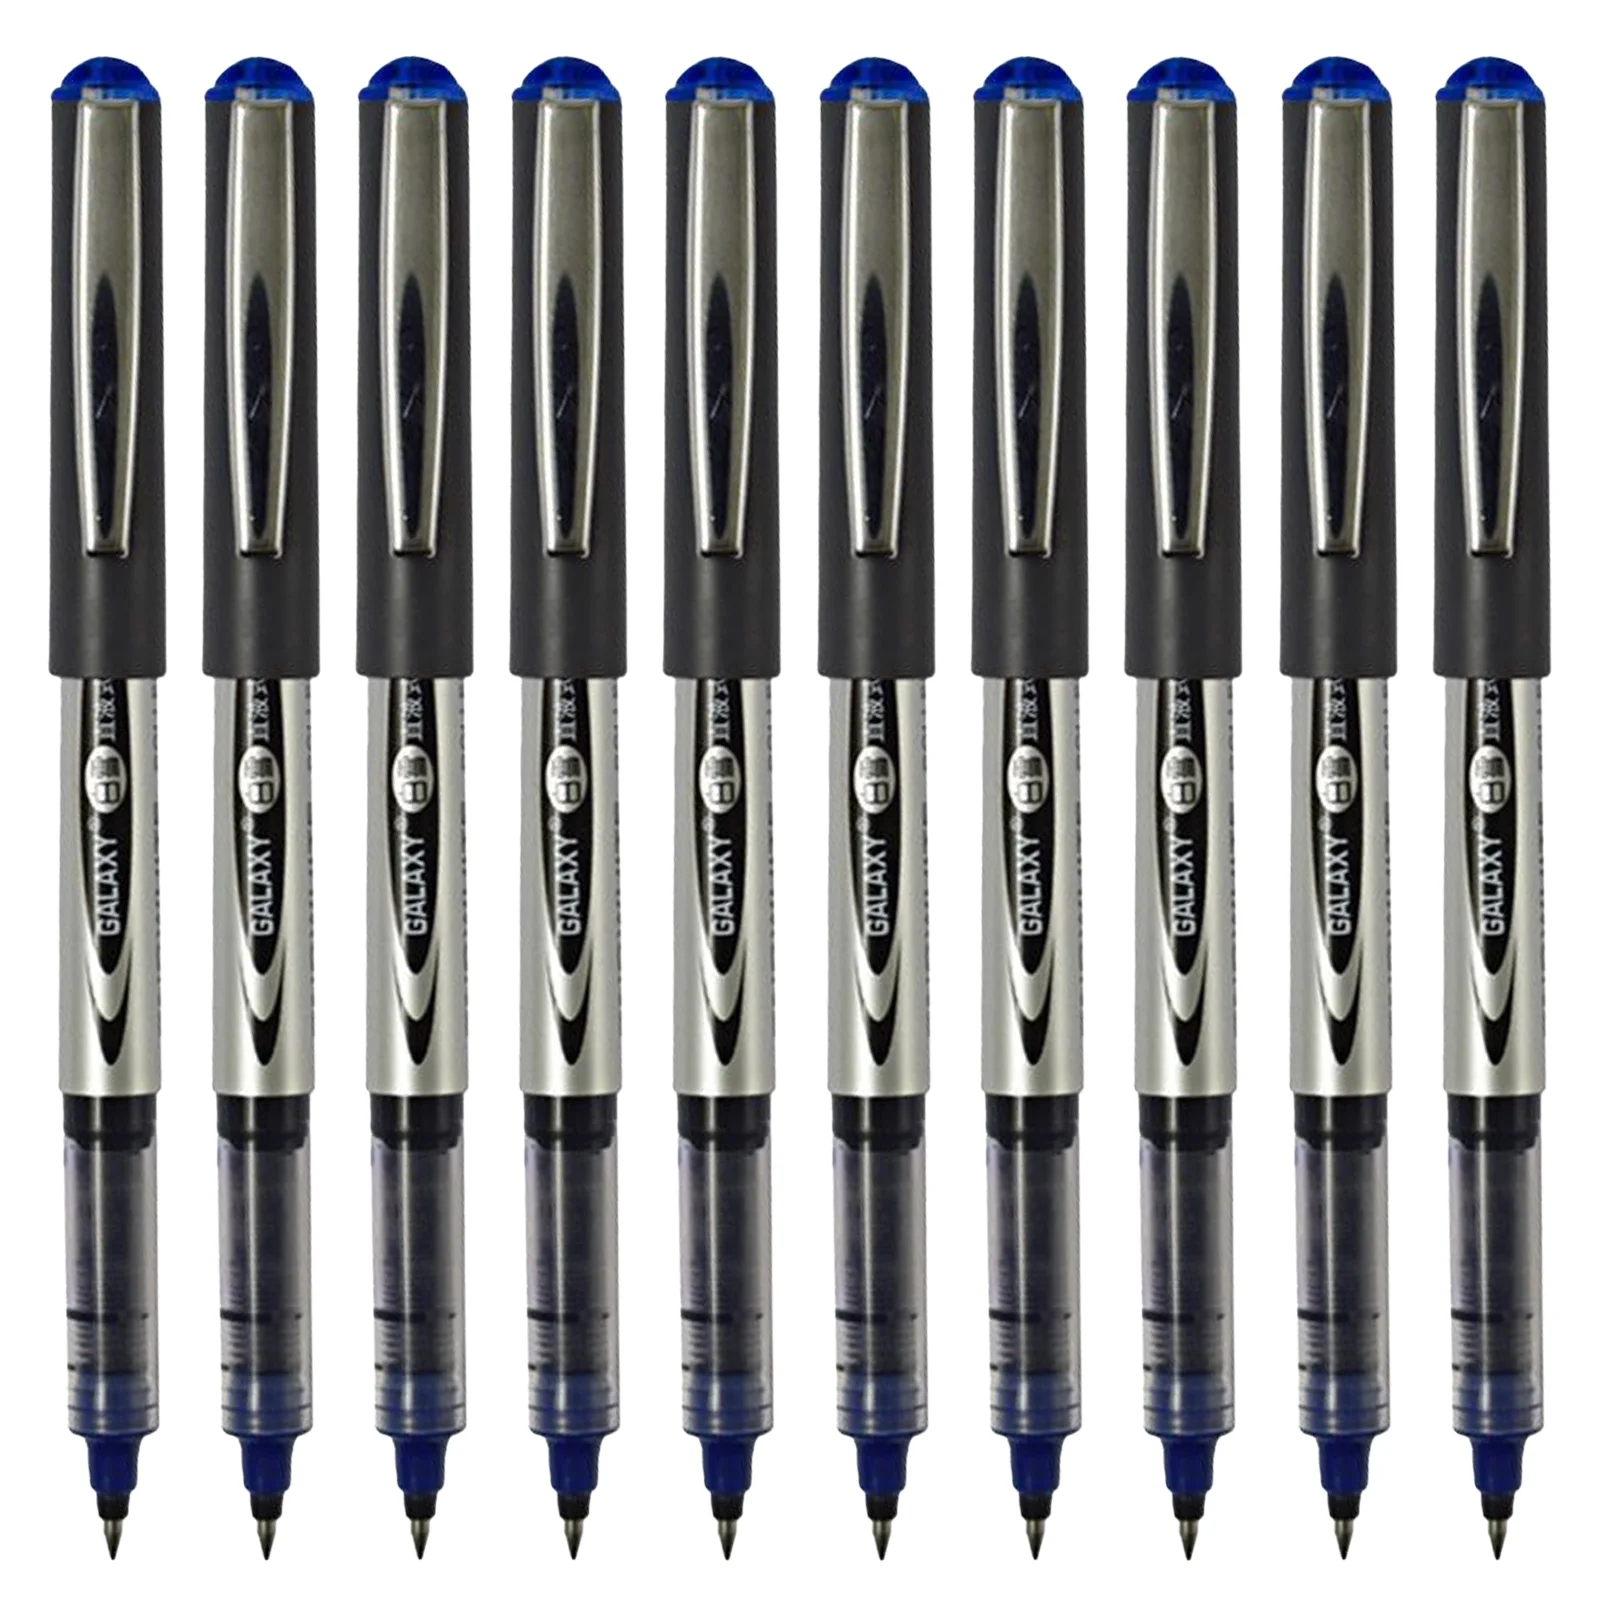 

10pcs 0.5mm Home Ballpoint Pen Office School Taking Notes Executive Smooth Quick Drying No Leakage Business Anti Drop Liquid Ink